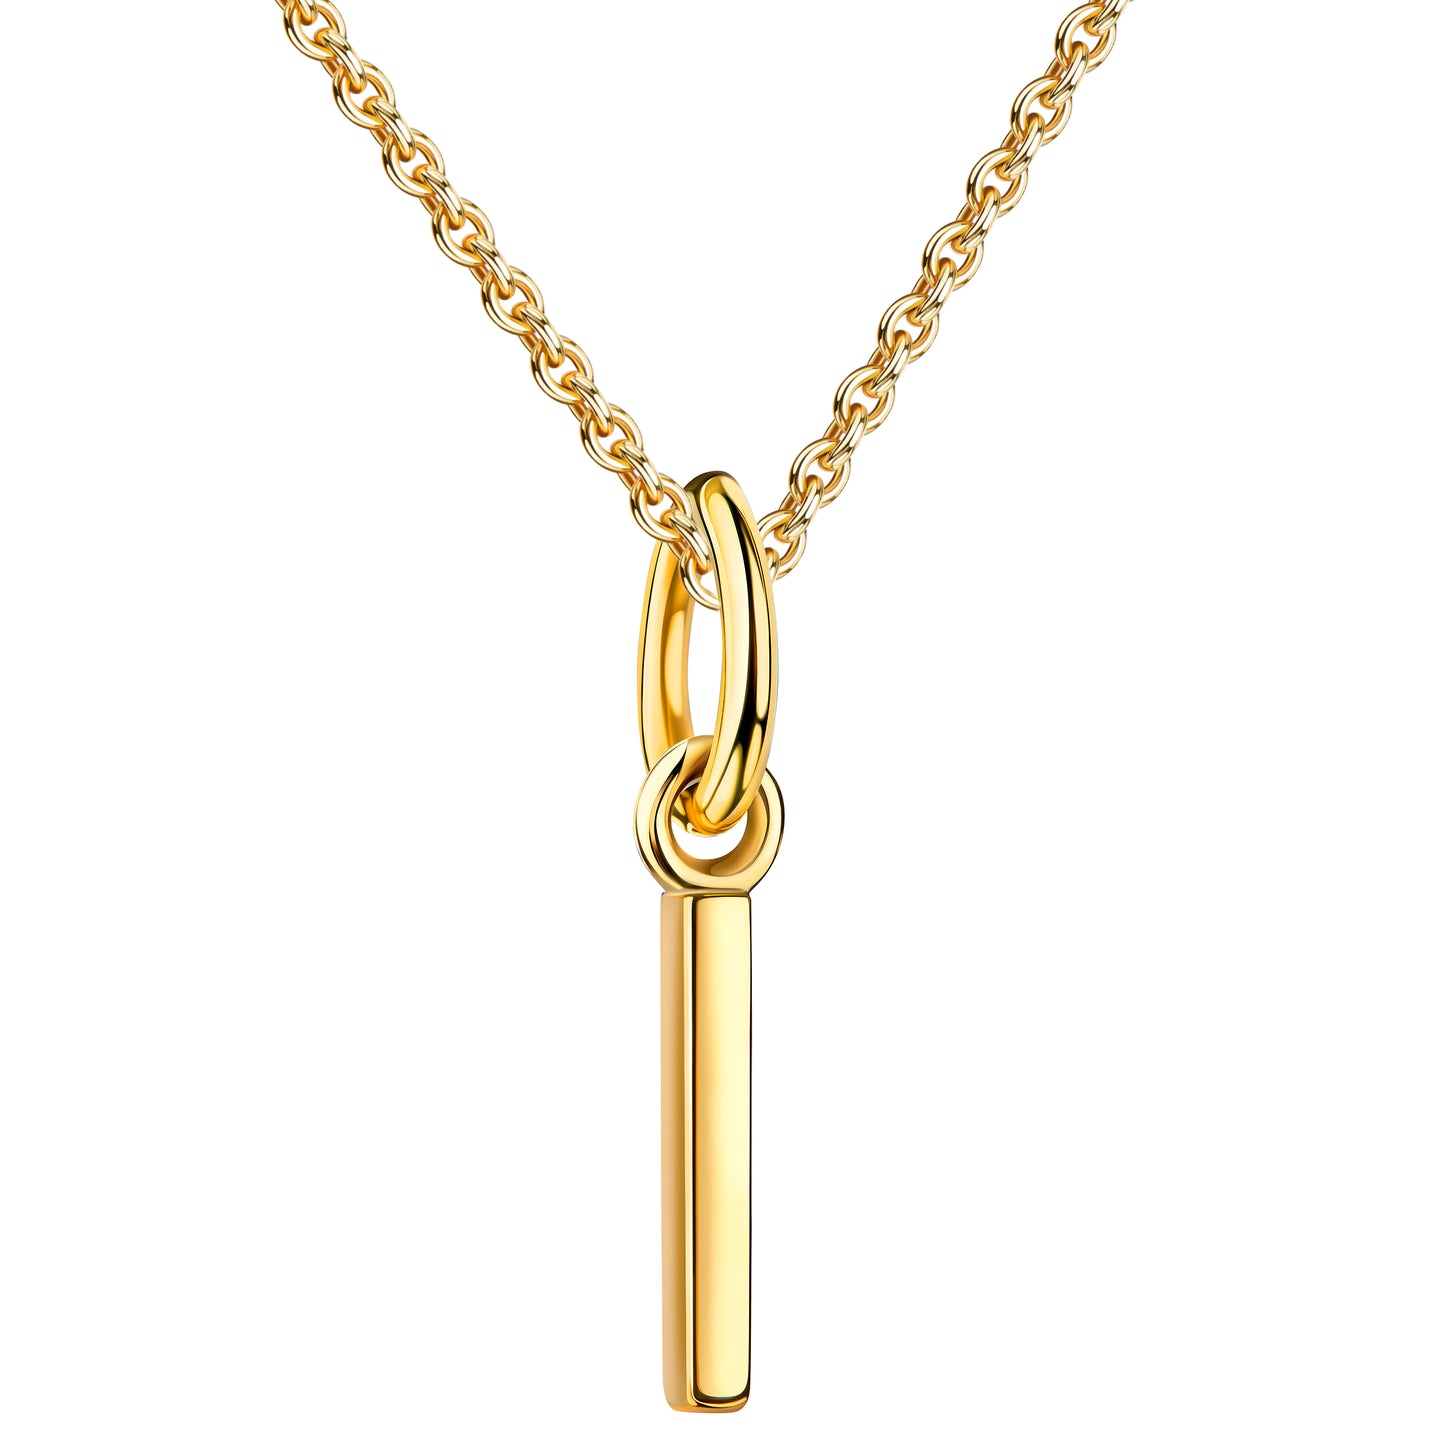 WRITE YOUR STORY I INITIAL ANHÄNGER I 8K GOLD